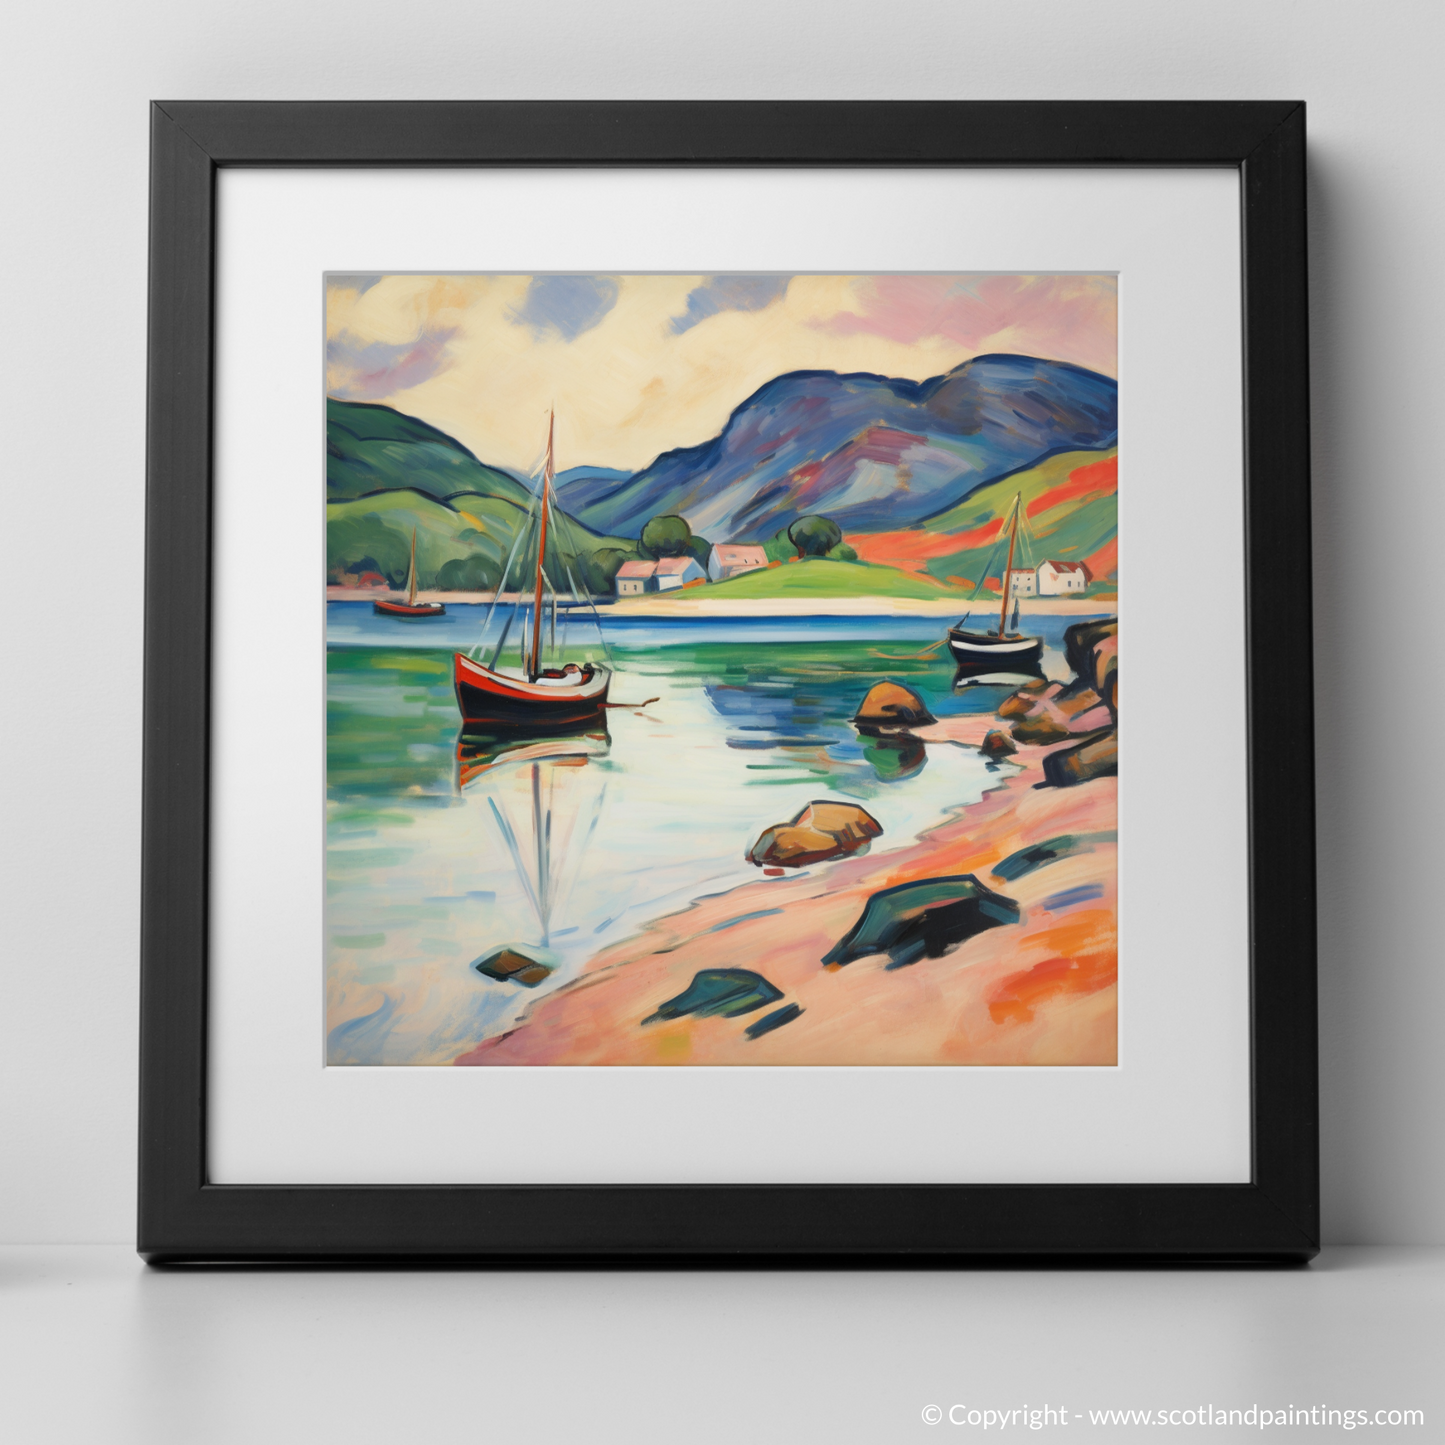 Vibrant Voyage at Gairloch Harbour